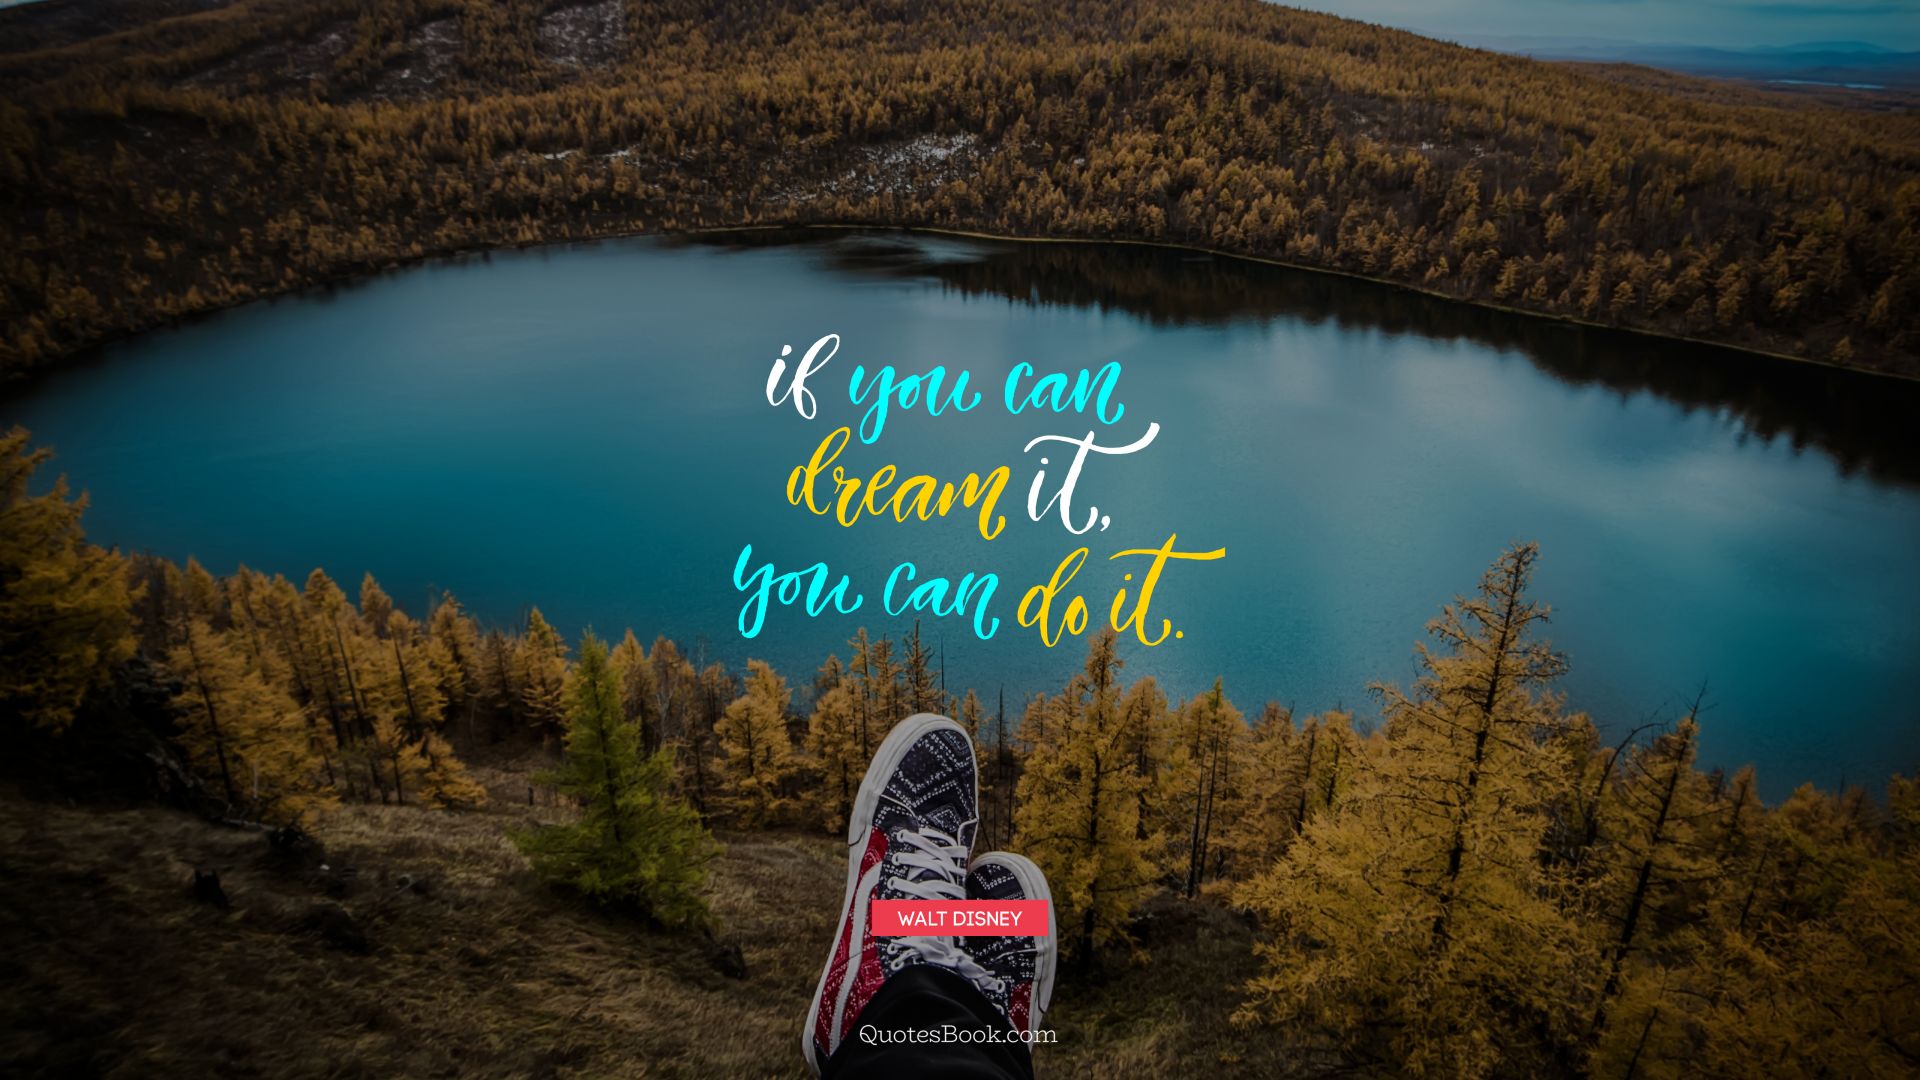 If you can dream it, you can do it. - Quote by Walt Disney